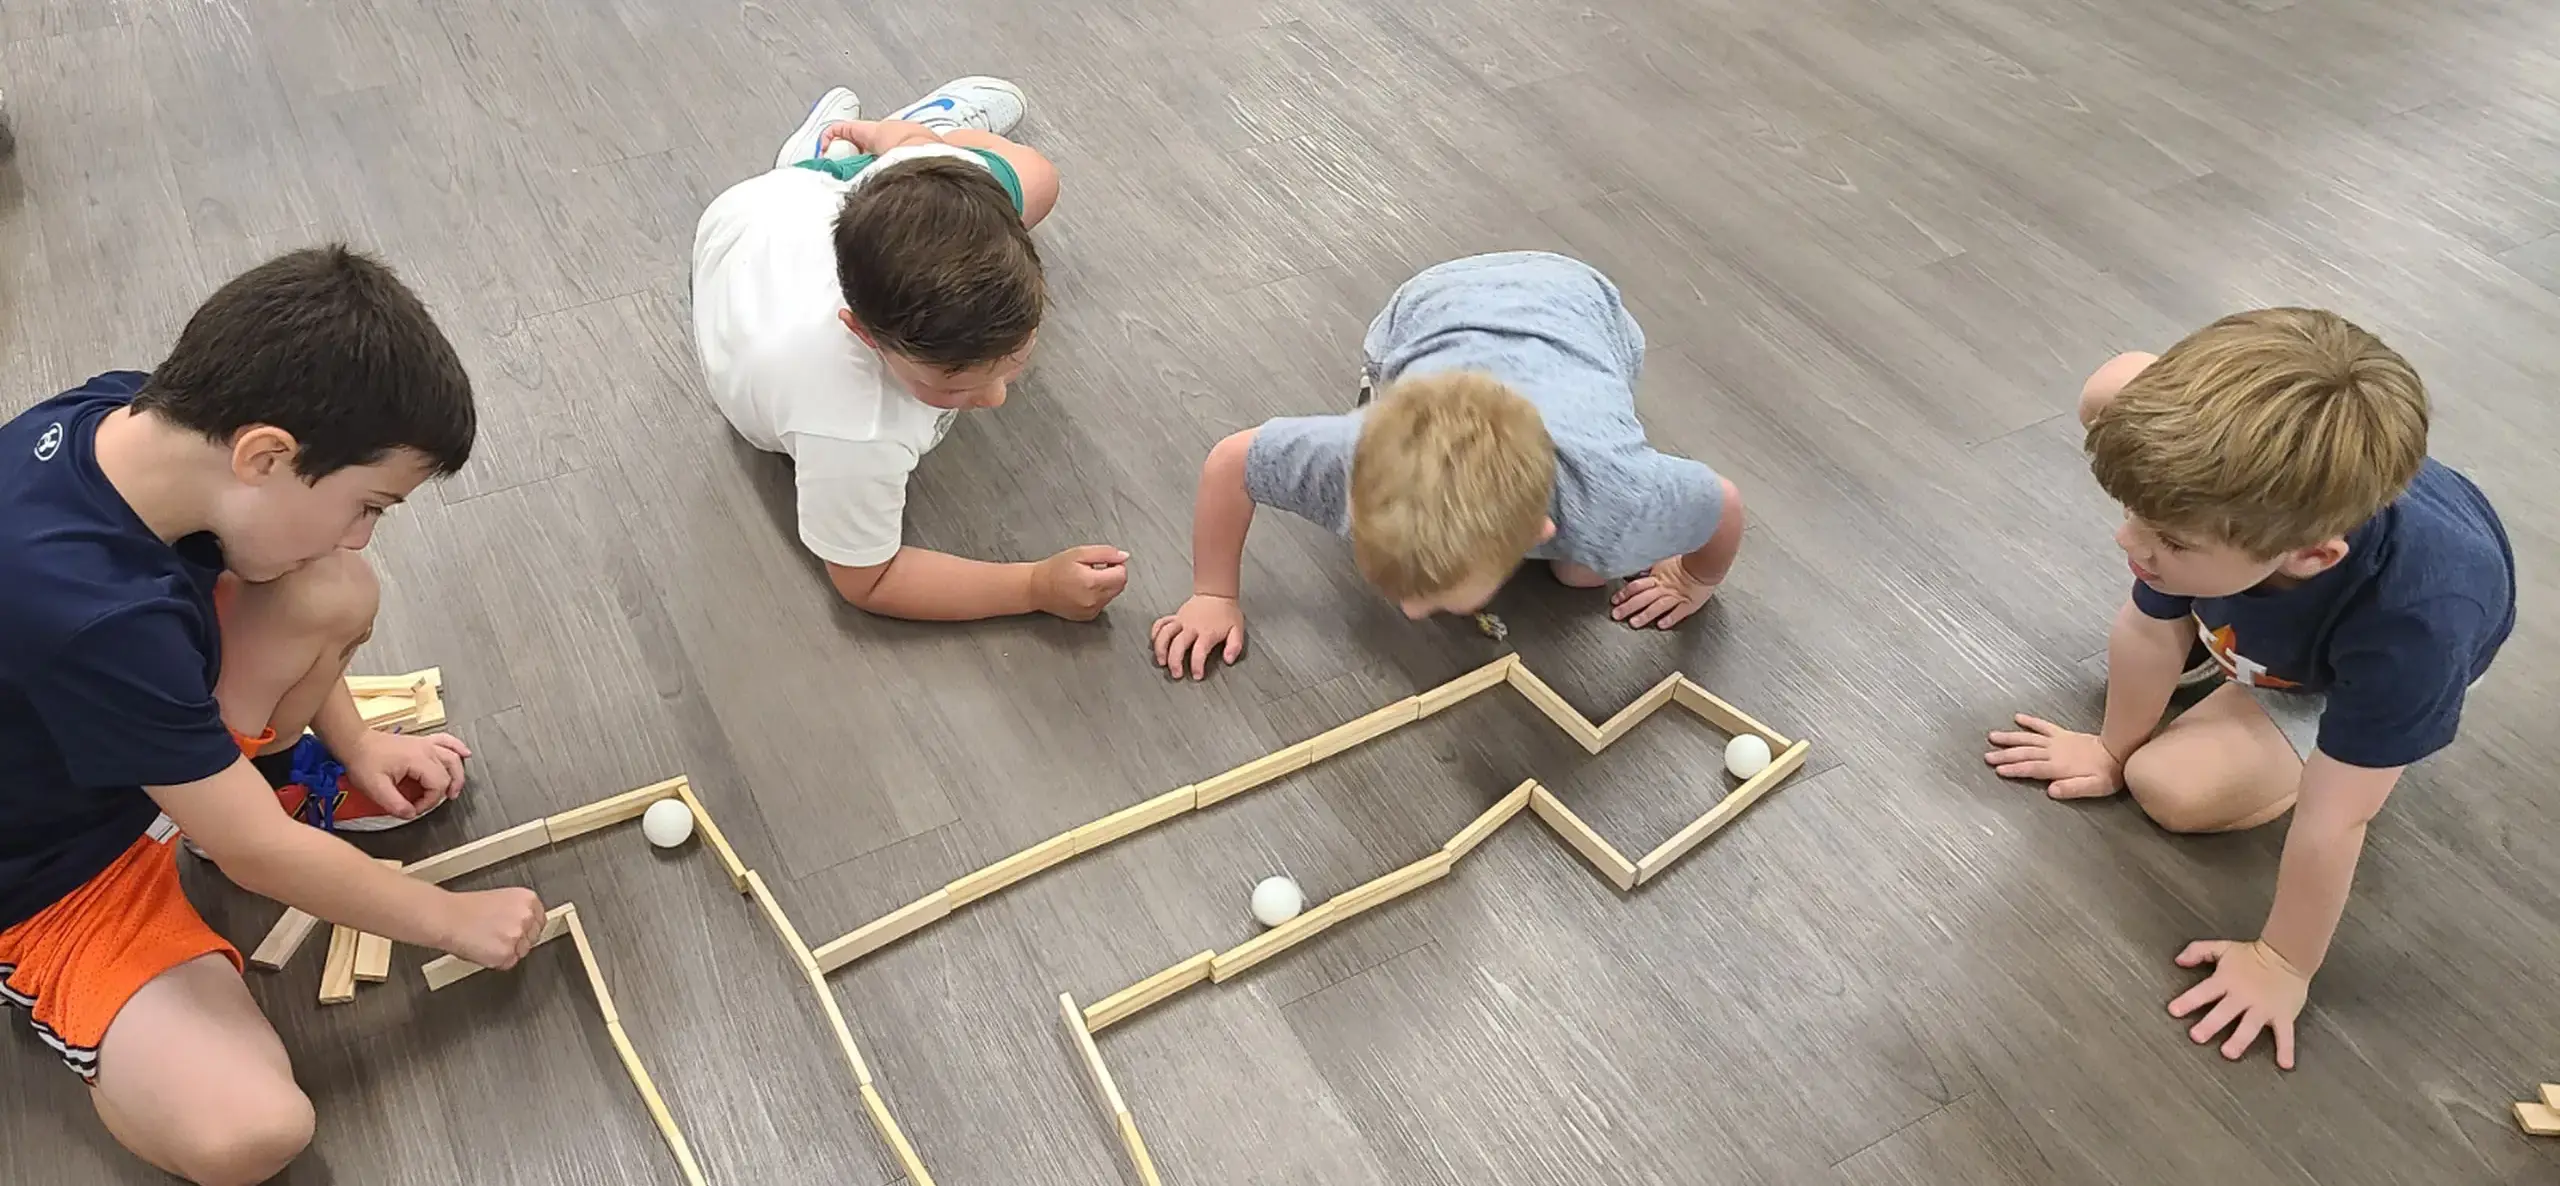 Children playing with a wooden maze